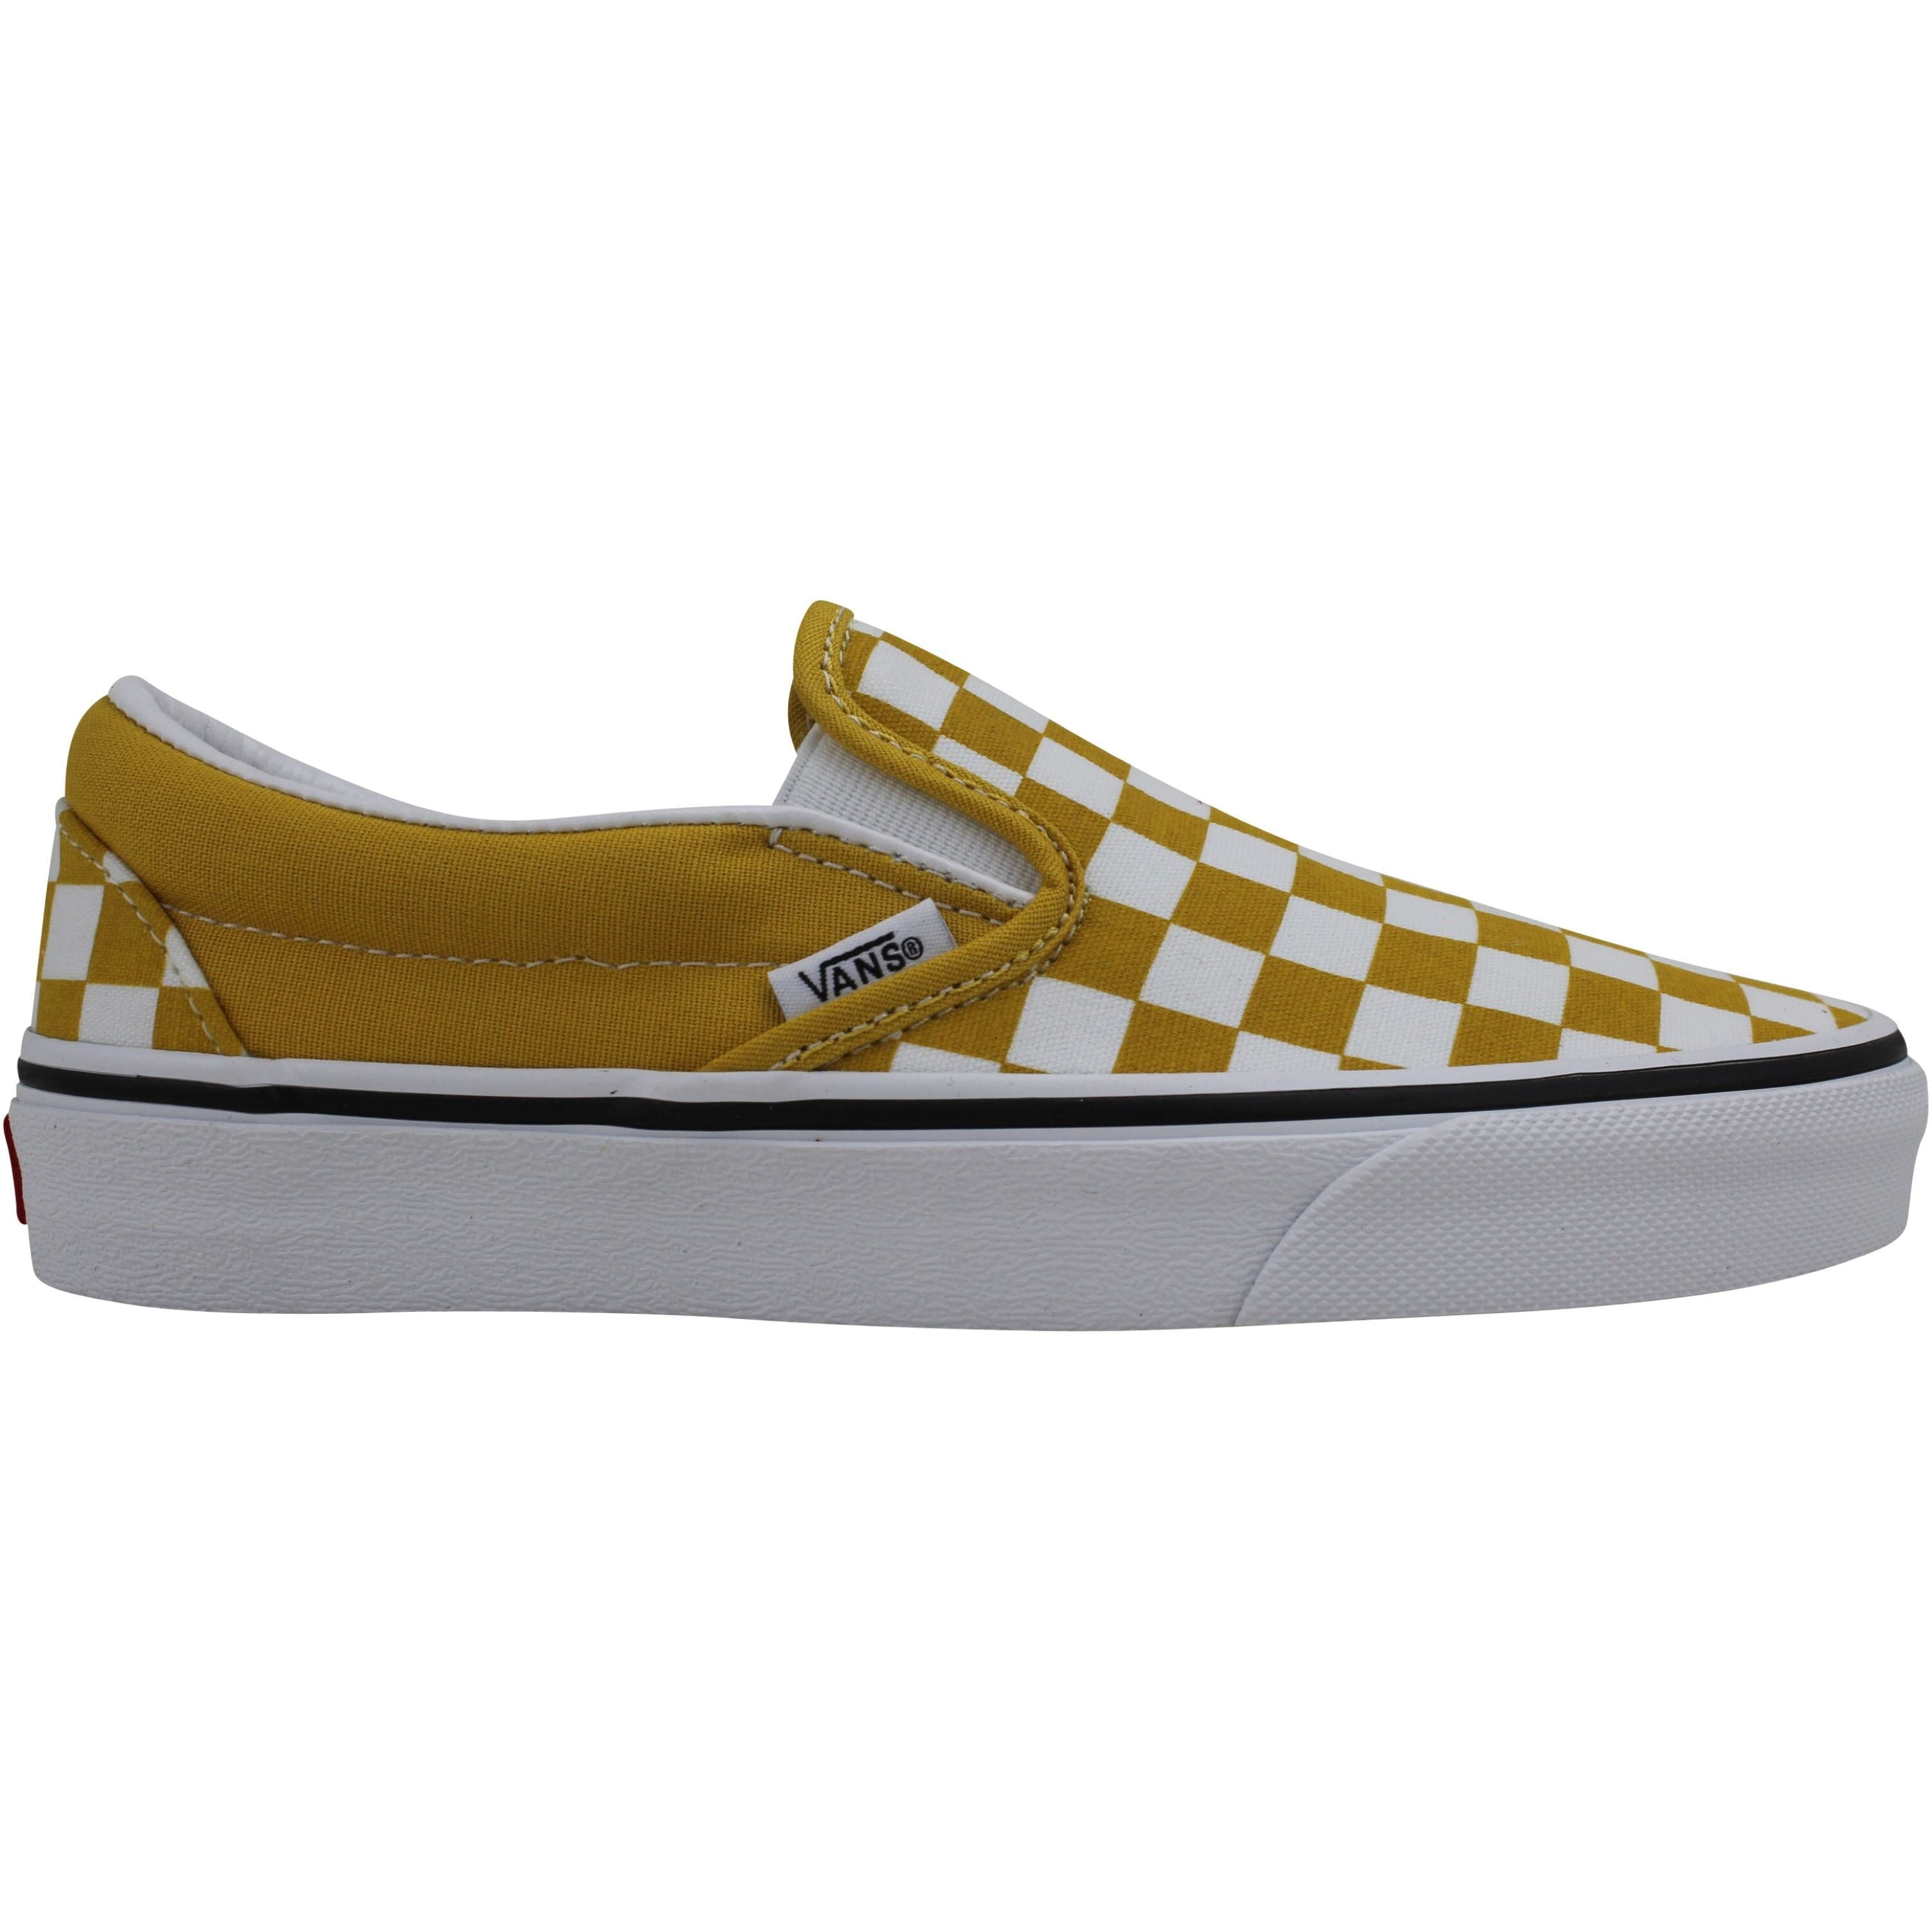 Vans Classic Slip-on checkerboard sneakers in white and yellow